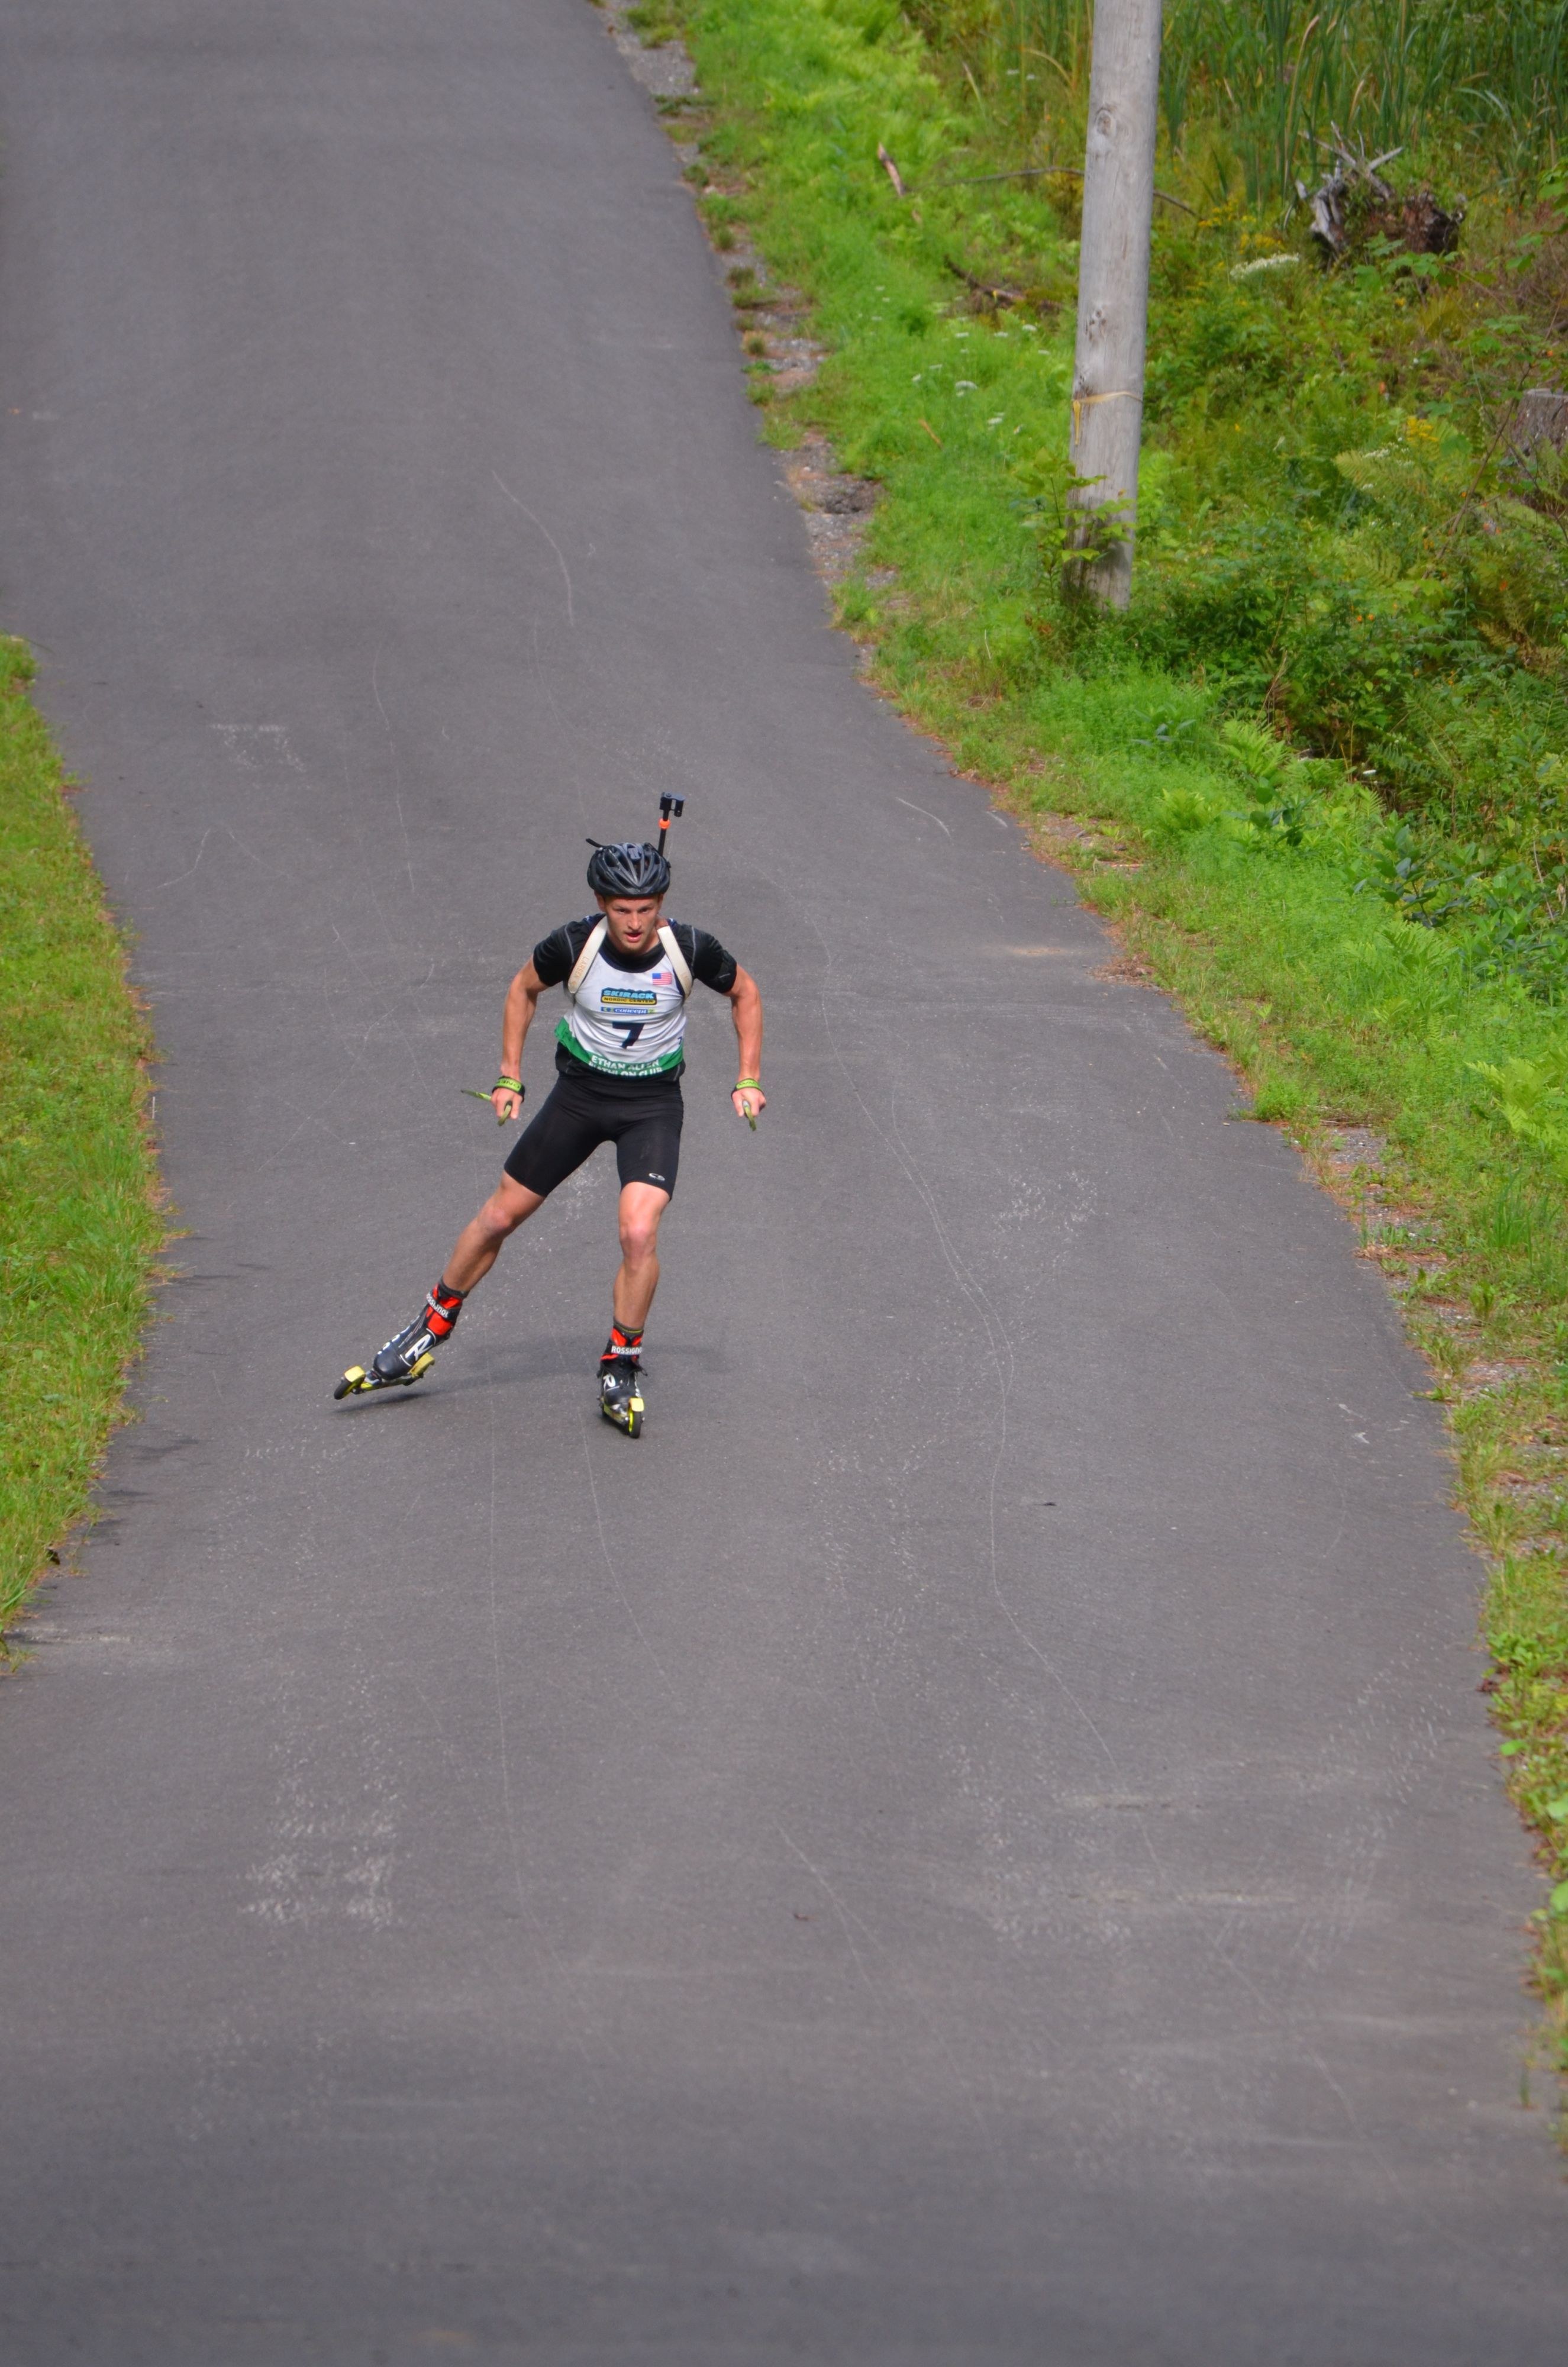 Jake Ellingson of Mount Itasca Biathlon shot a flawless race in the mass start of the North American Rollerski Cup in Jericho, Vermont, to place second overall and the top American. (Photo: Paul Bierman)